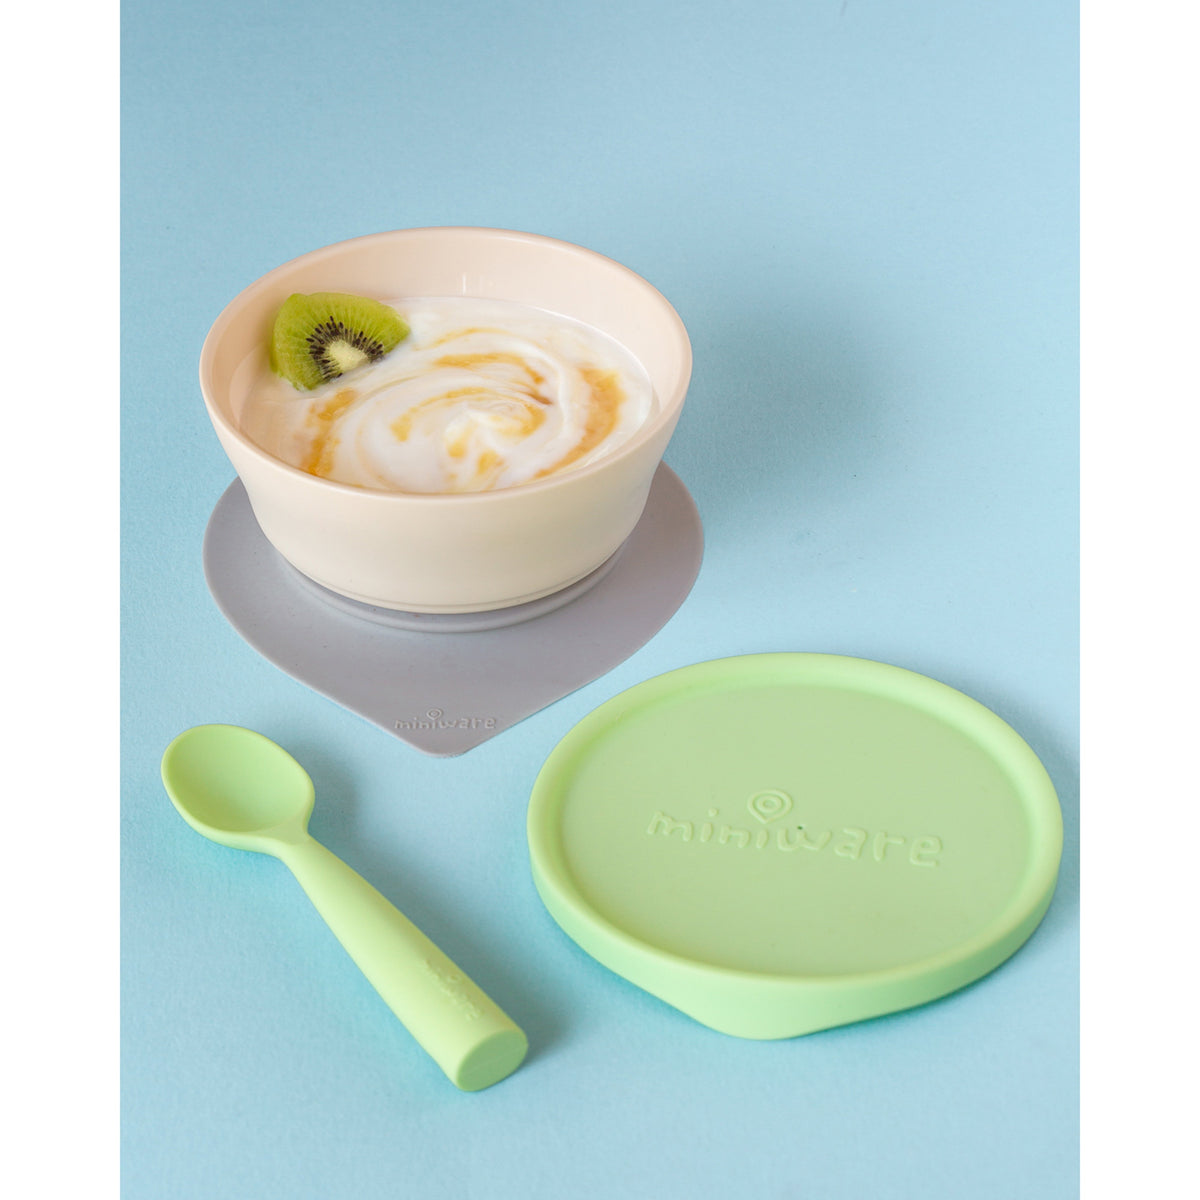 miniware-first-bite-set-pla-cereal-suction-bowl-vanilla-+-silicone-spoon-and-cover-in-cotton-keylime- (19)